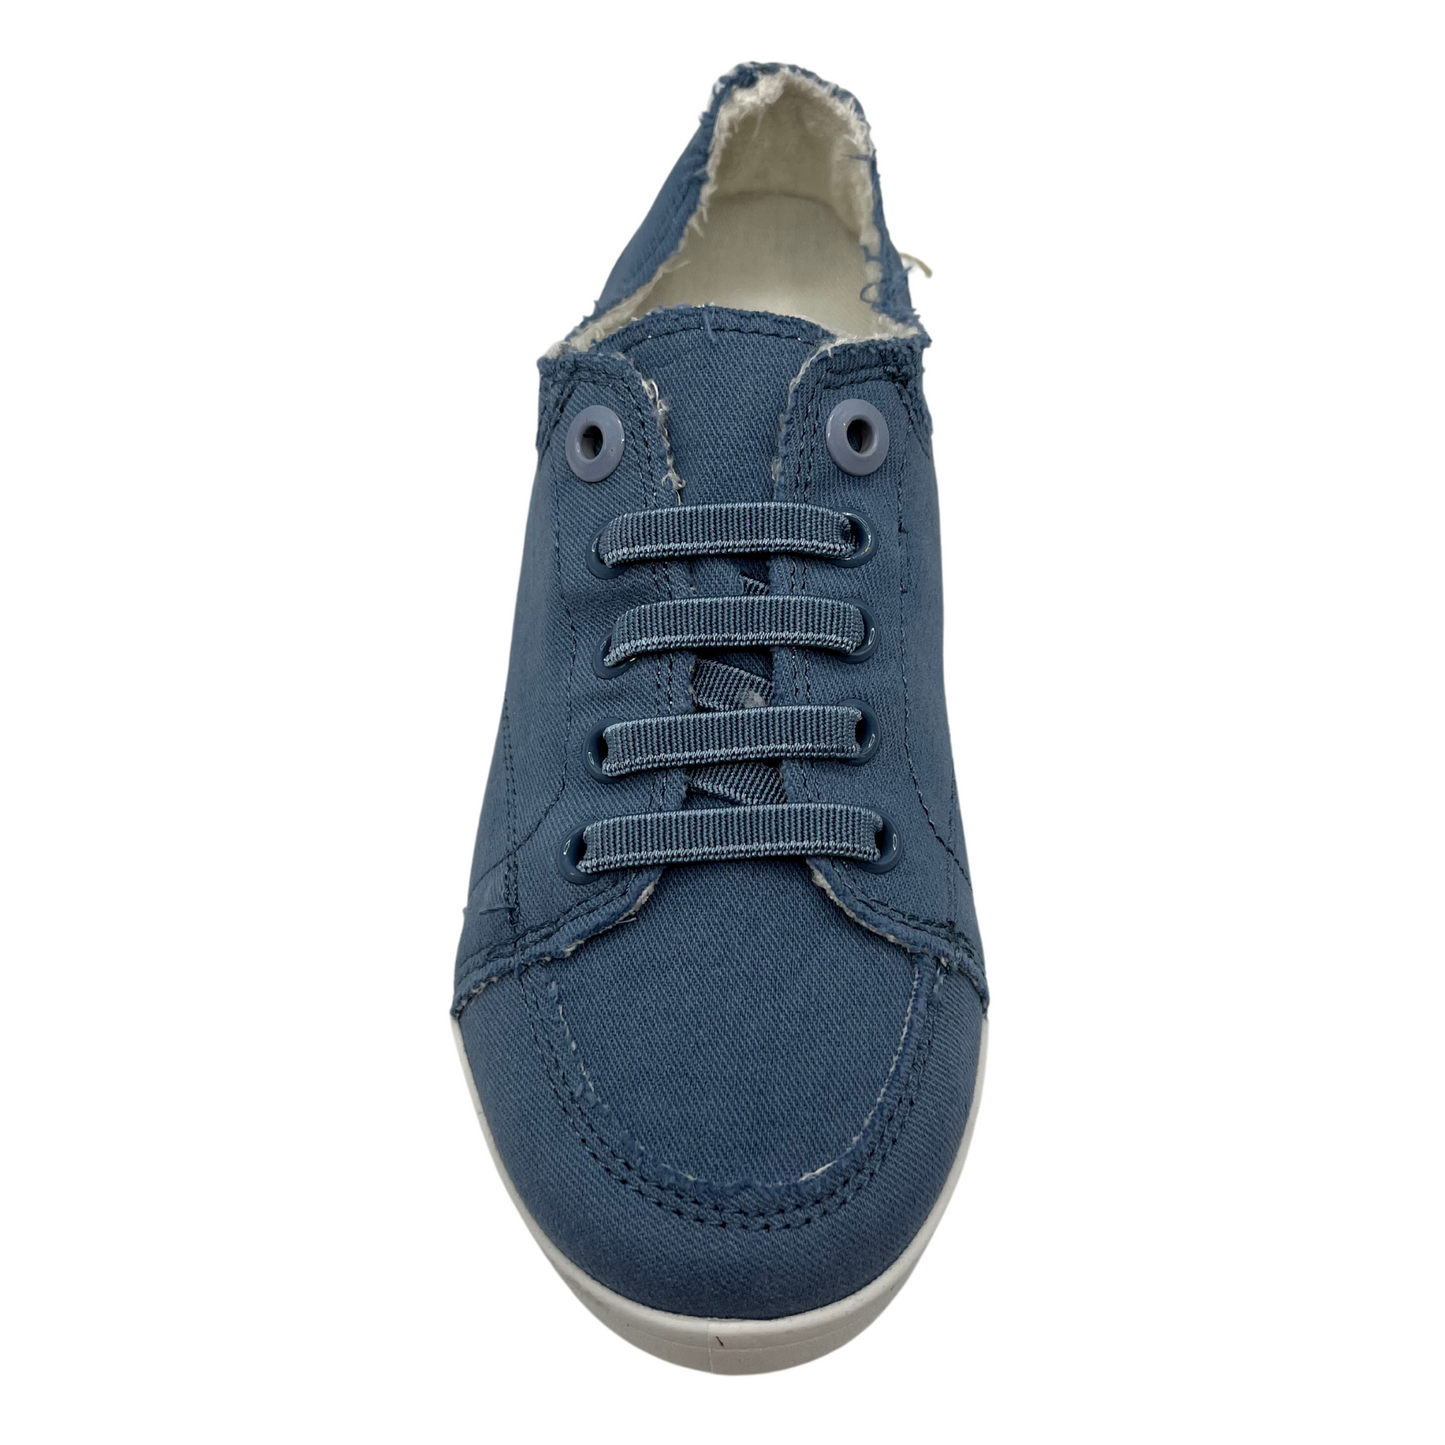 Top view of blue canvas sneaker with matching laces and white rubber outsole